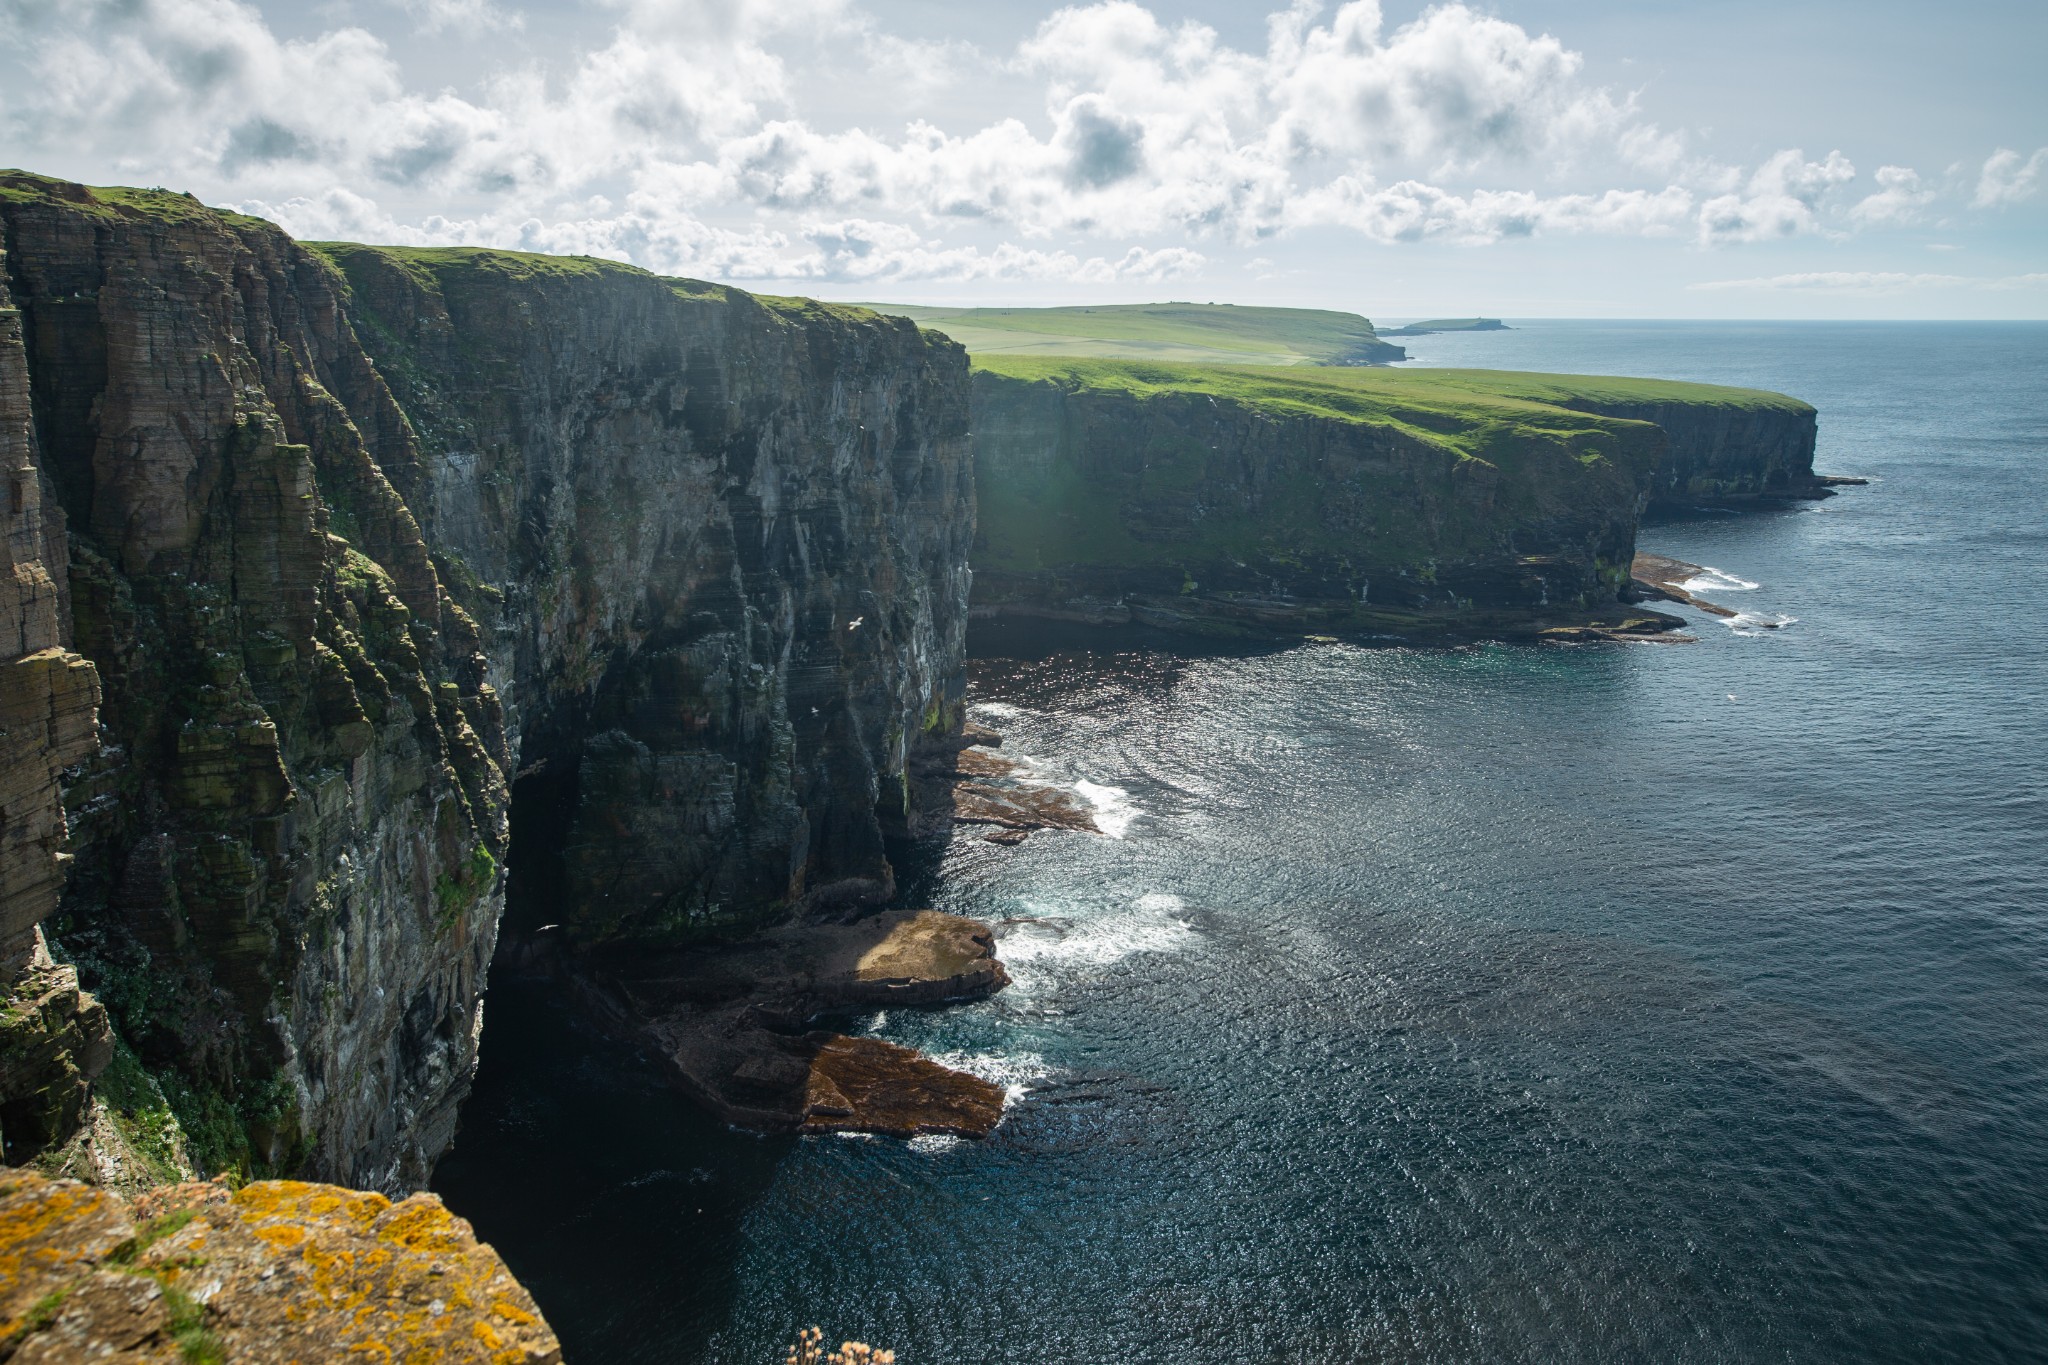 The coastline at Costa, Orkney